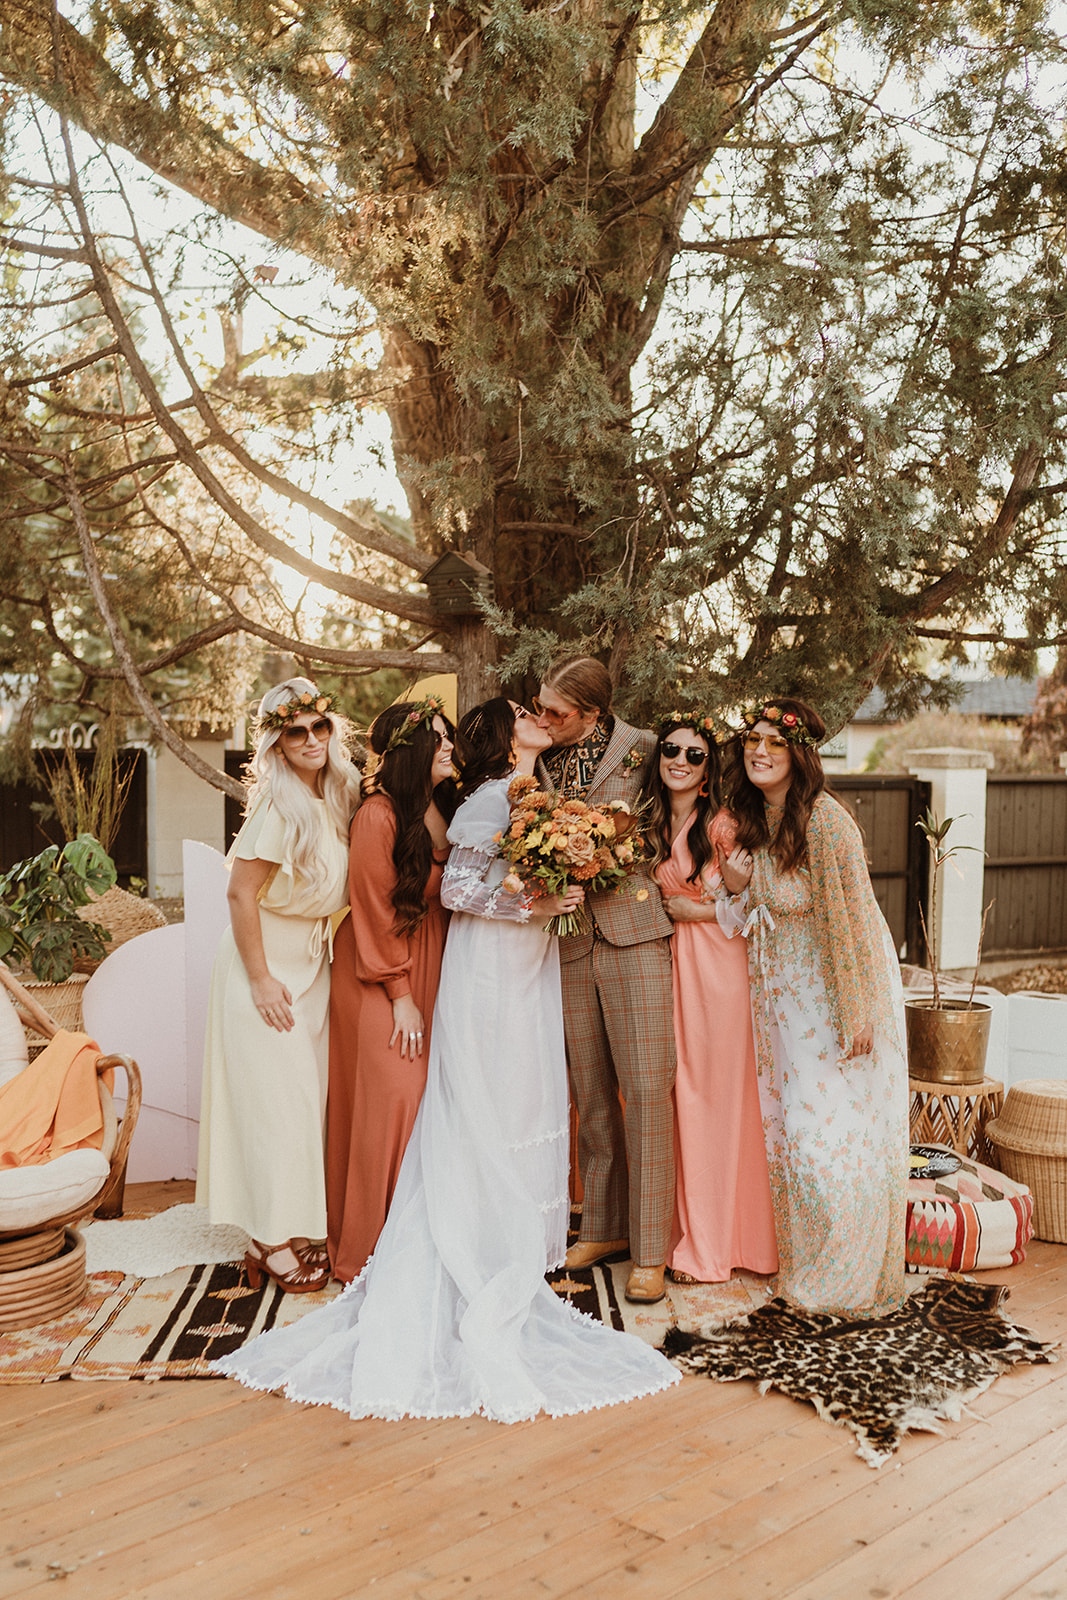 Groovy retro bride and groom share a kiss under a tree on their wedding day for 70's Backyard Wedding Inspiration